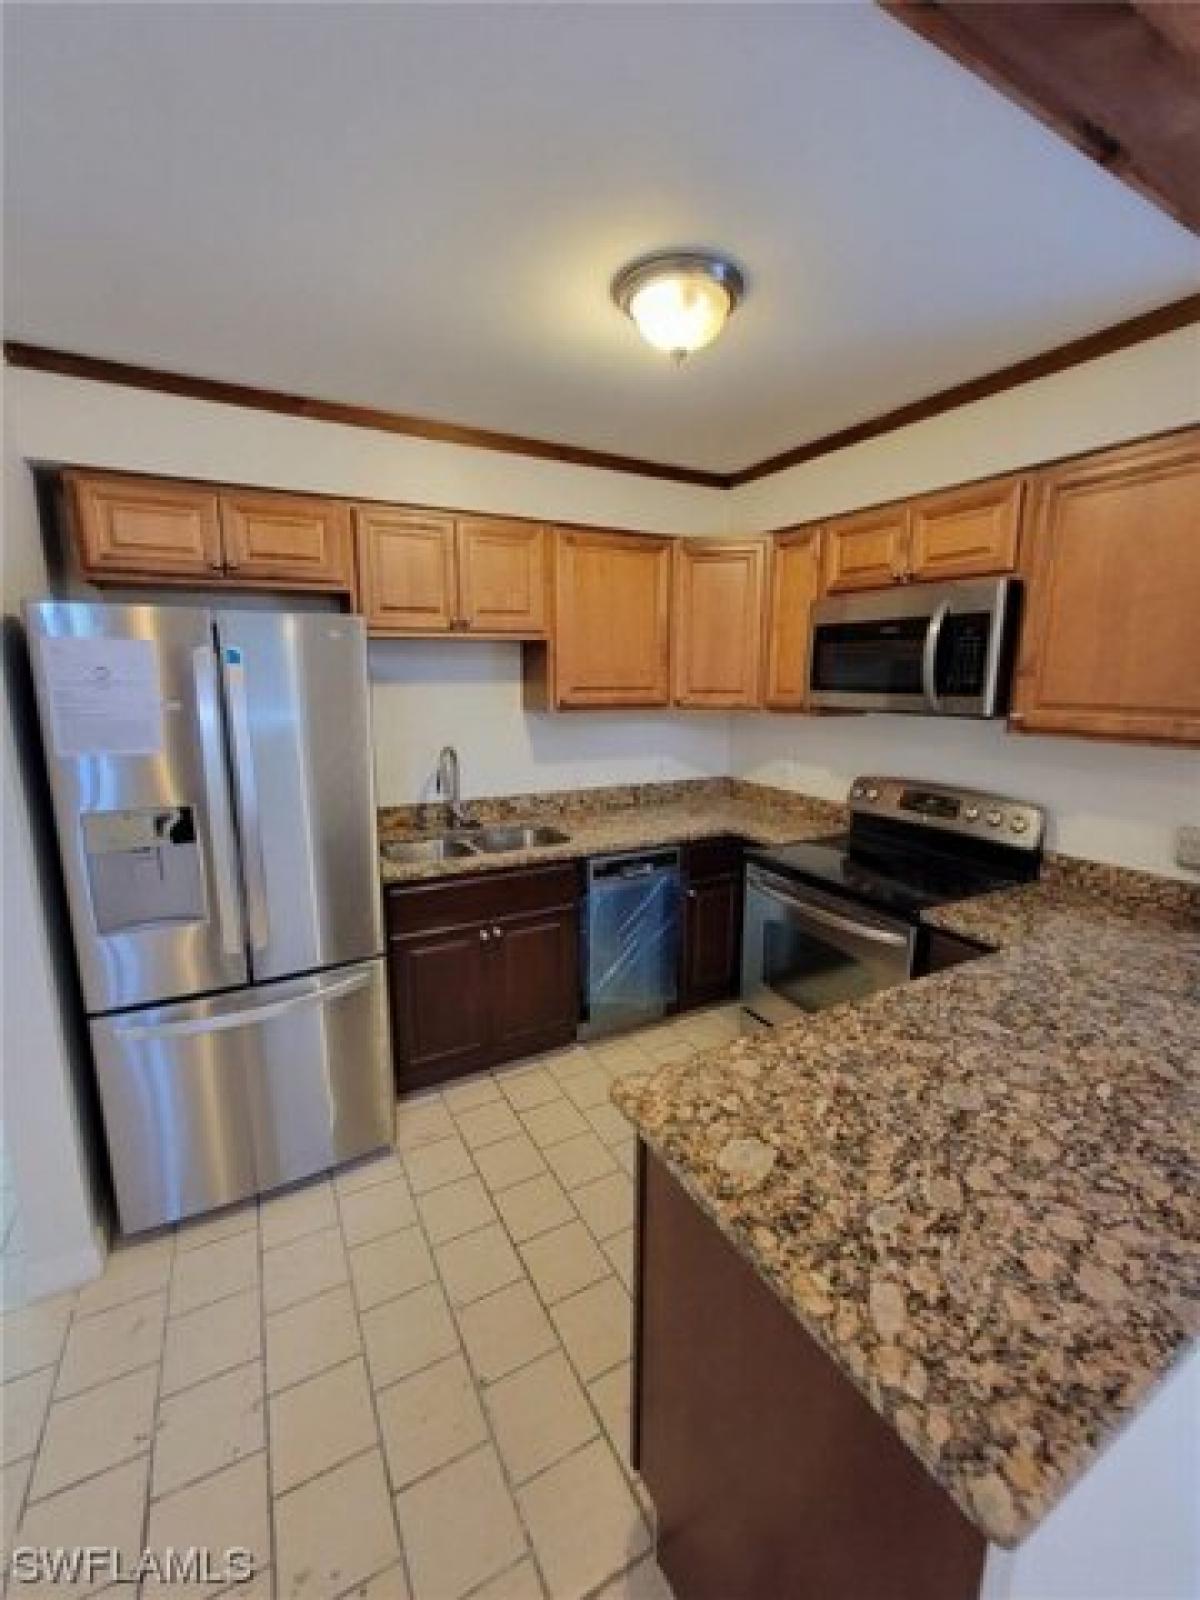 Picture of Home For Rent in Cape Coral, Florida, United States